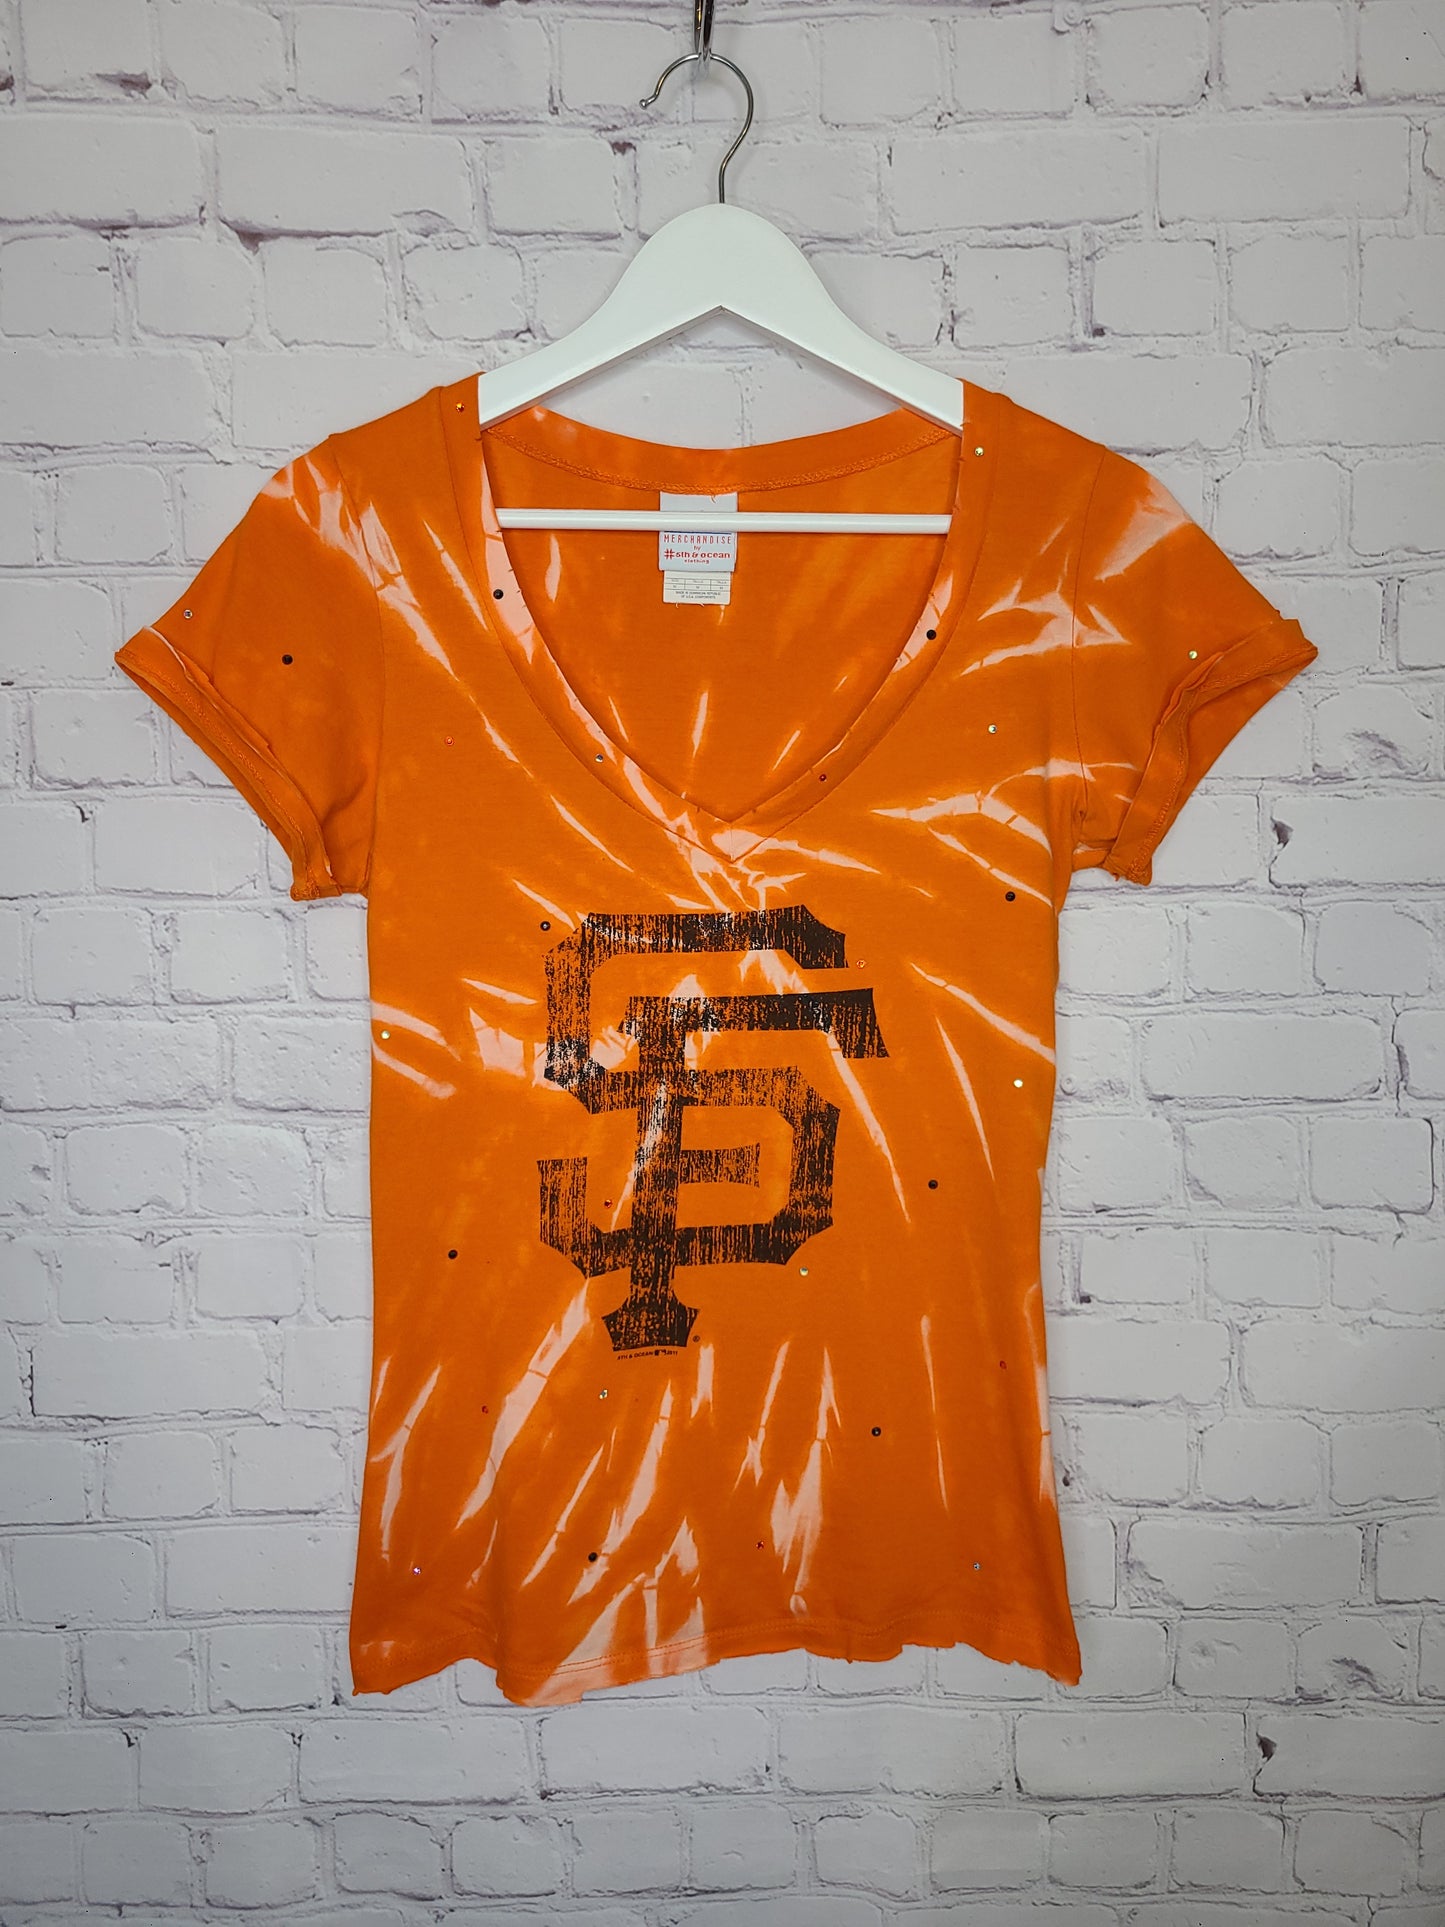 San Francisco Giants Fitted Tee